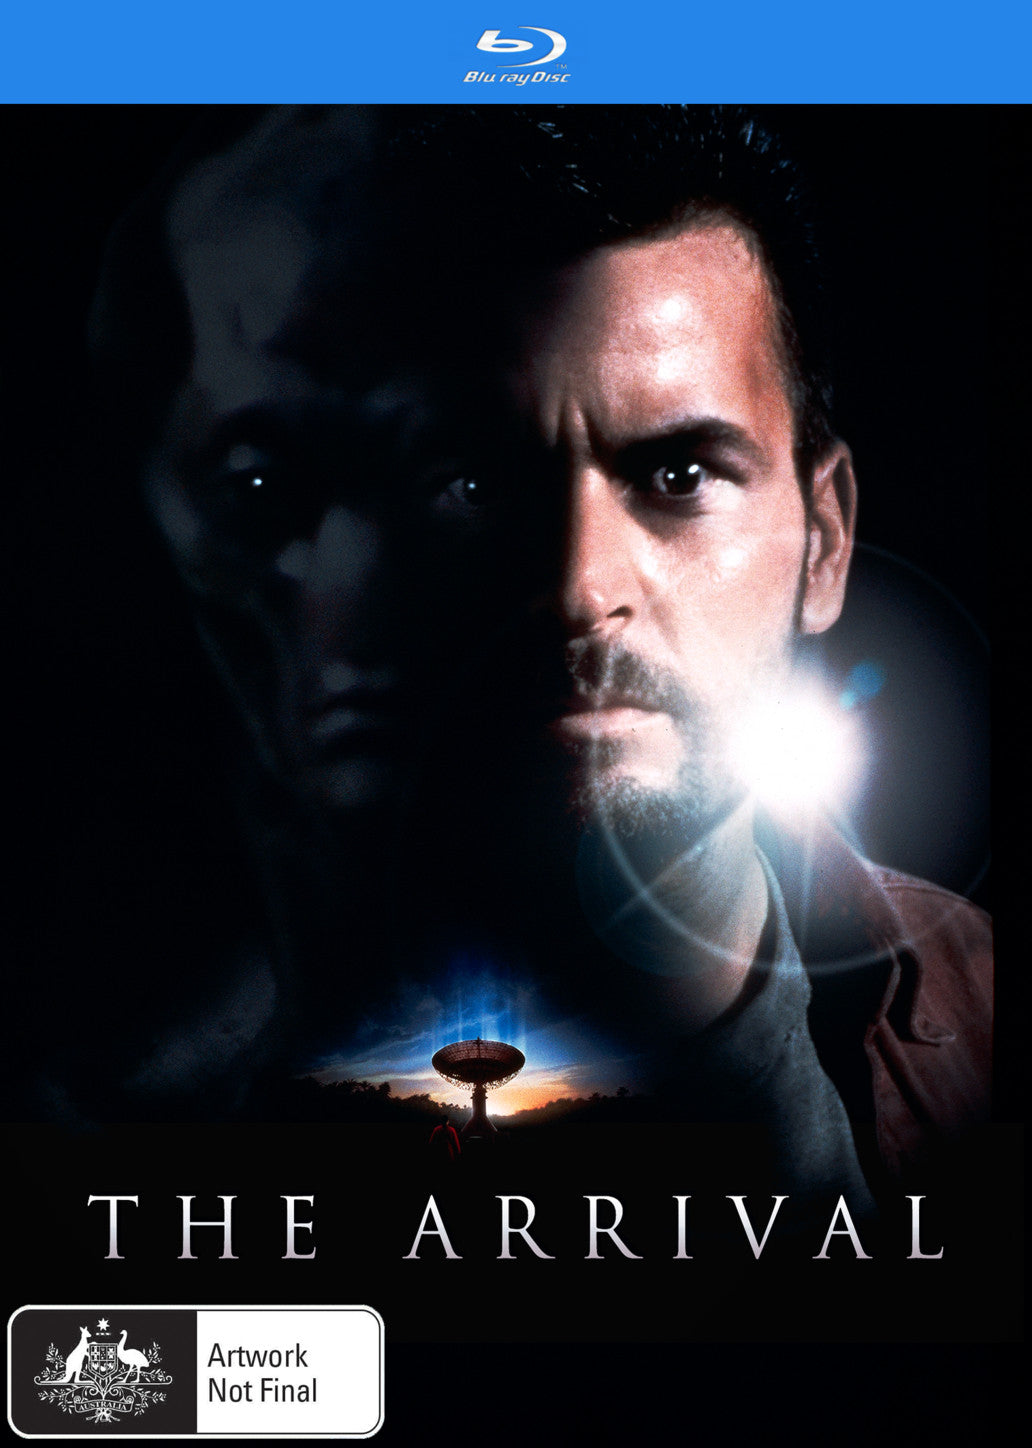 THE ARRIVAL - SPECIAL EDITION BLU-RAY